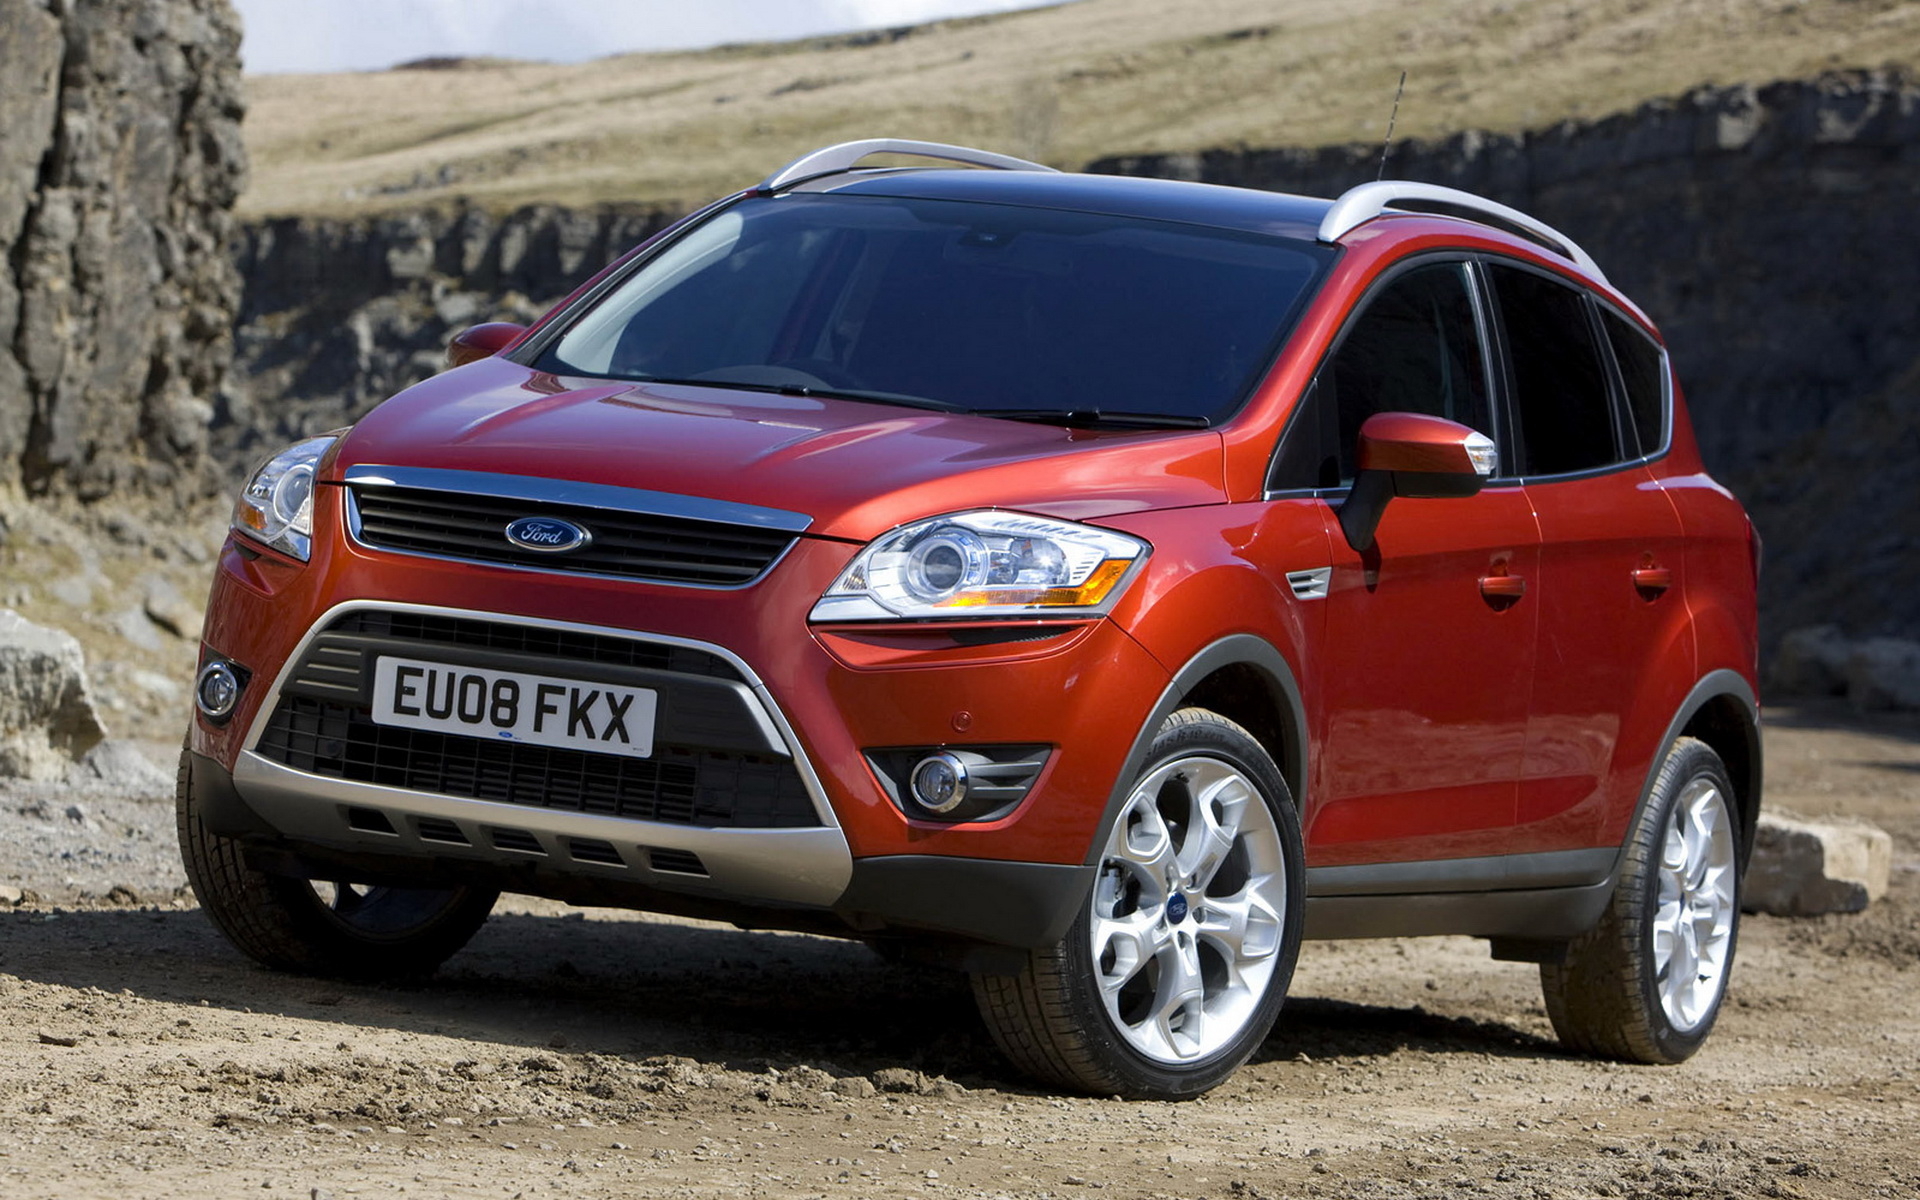 Ford Kuga wallpaper and image, picture, photo